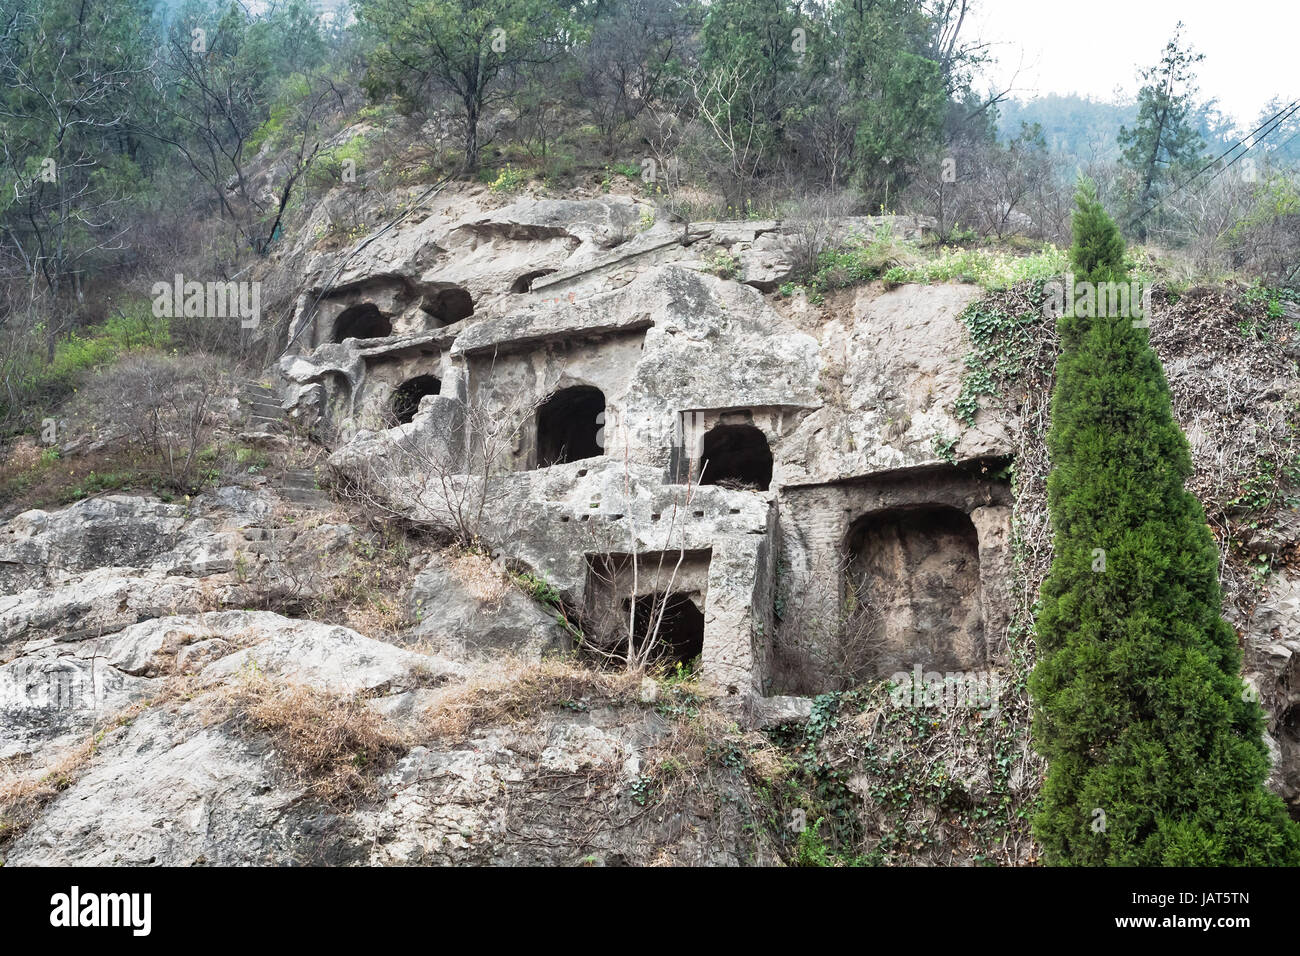 LUOYANG, CHINA - MARCH 20, 2017: caves in West Hill of Chinese Buddhist monument Longmen Grottoes. The complex was inscribed upon the UNESCO World Her Stock Photo